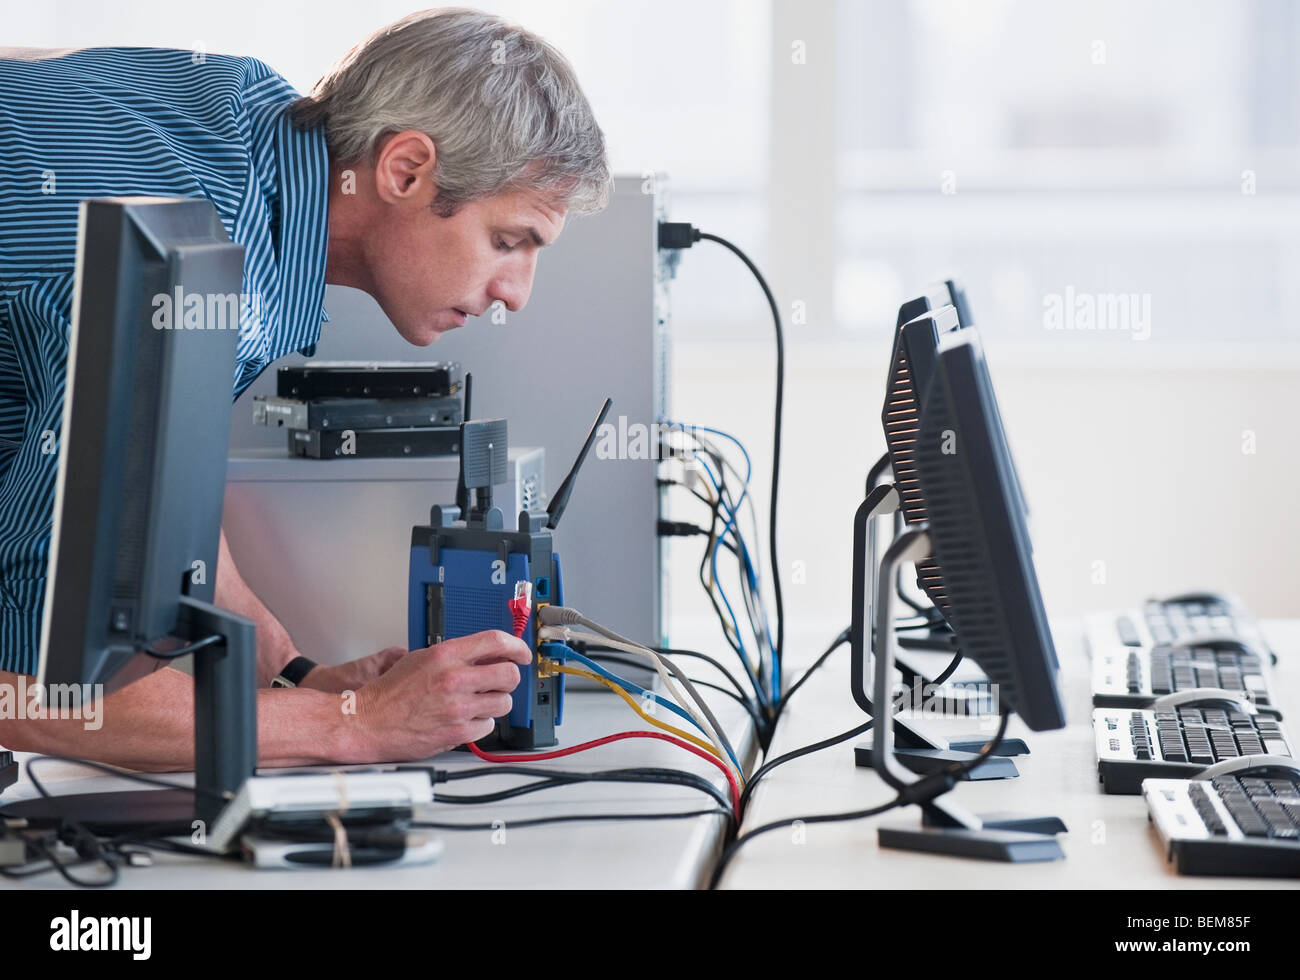 Man with networked computers Stock Photo